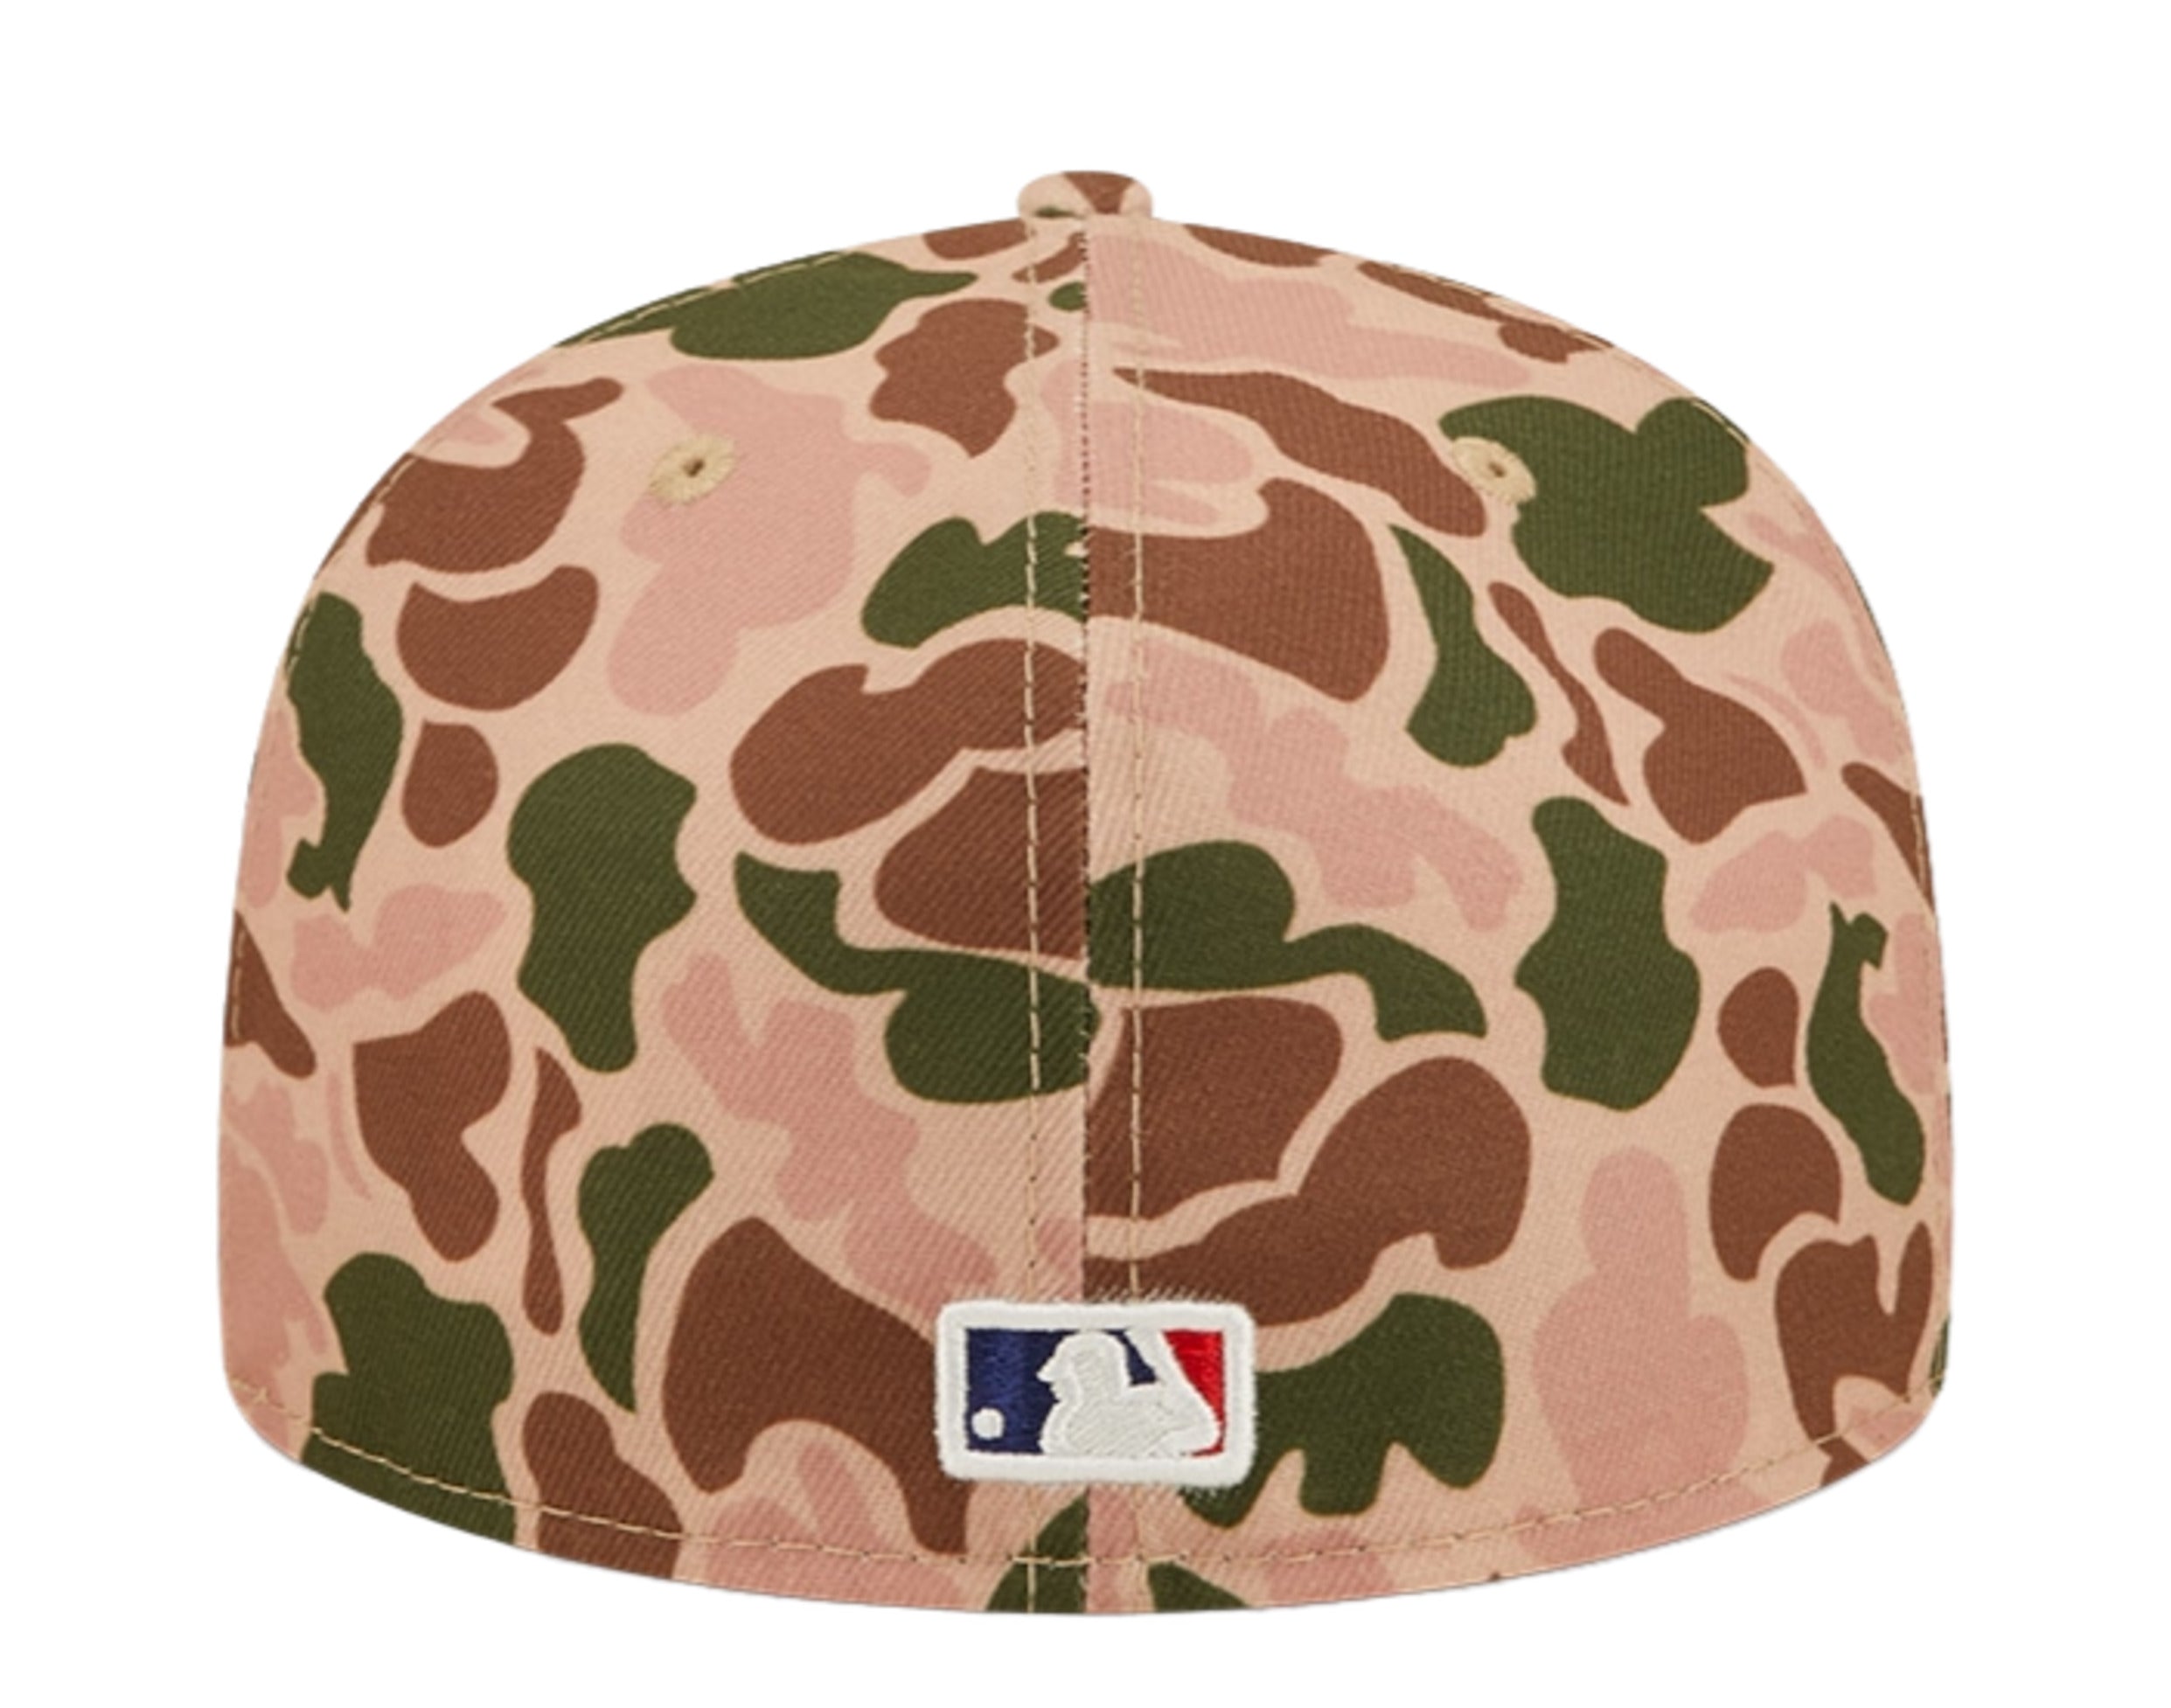 New Era 59FIFTY MLB Los Angeles Dodgers Duck Camo Fitted Hat 7 1/2